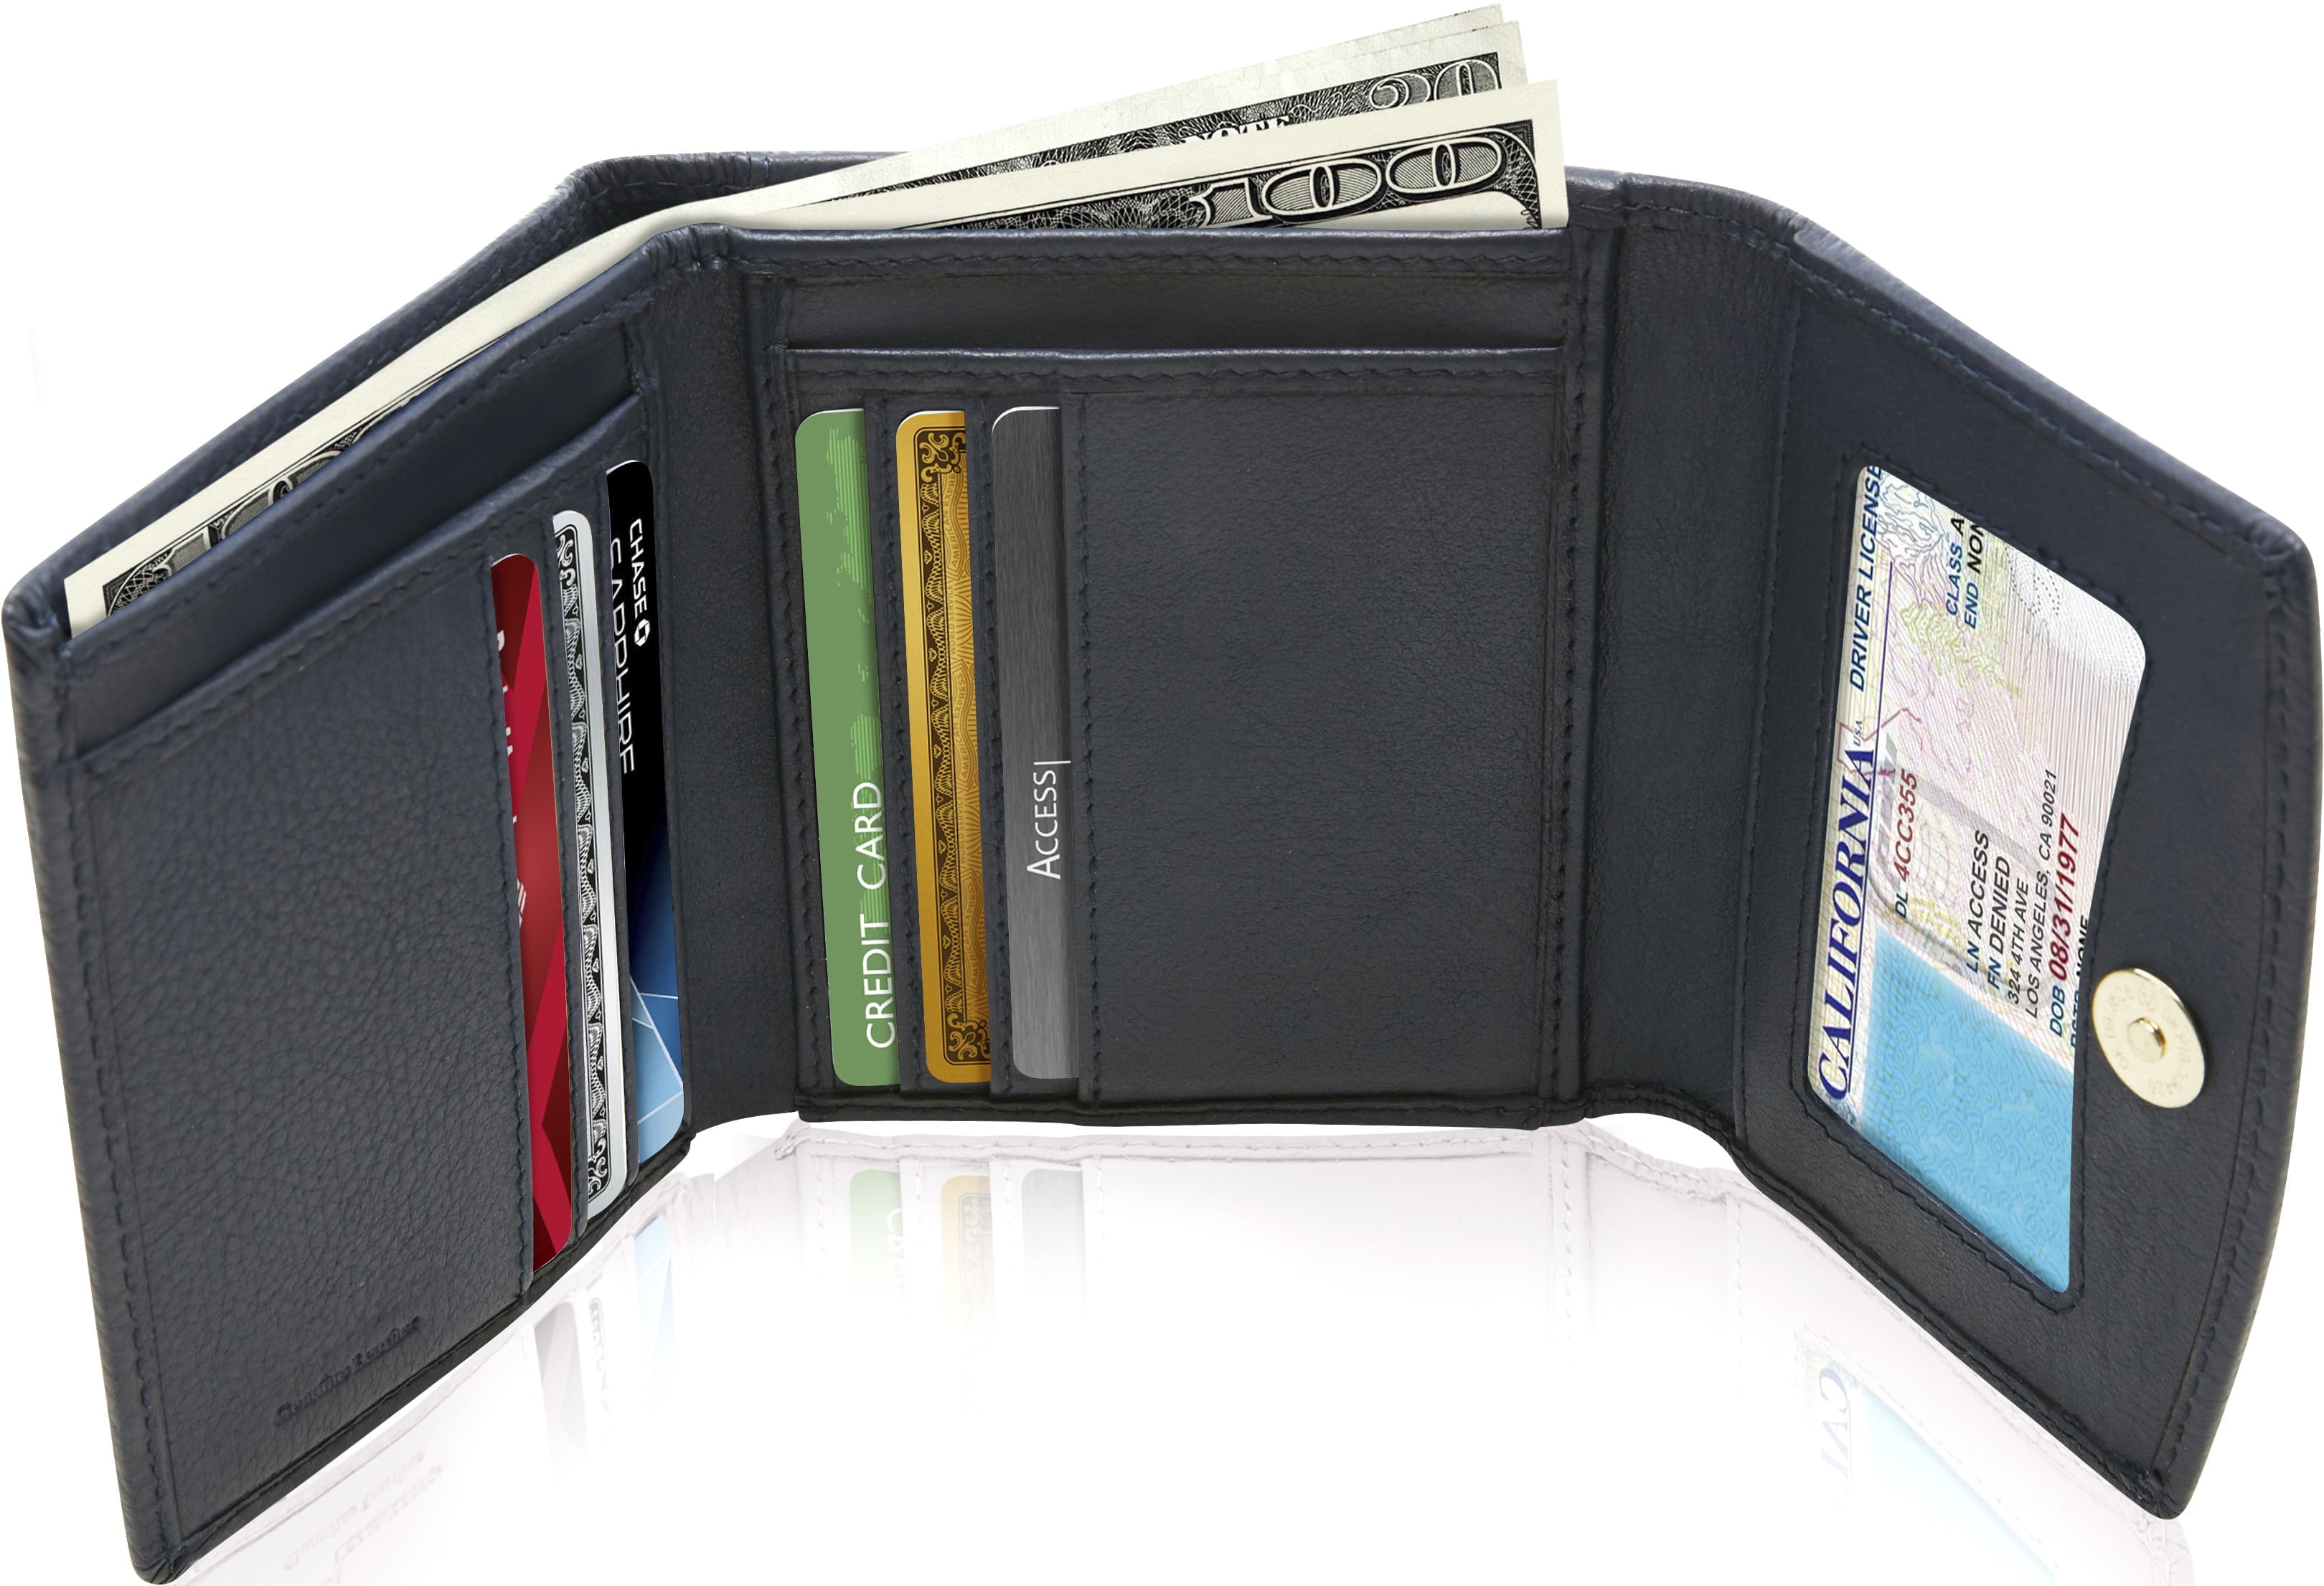 Small Credit ID Card Holder Slim Leather Wallet With Coin Pocket